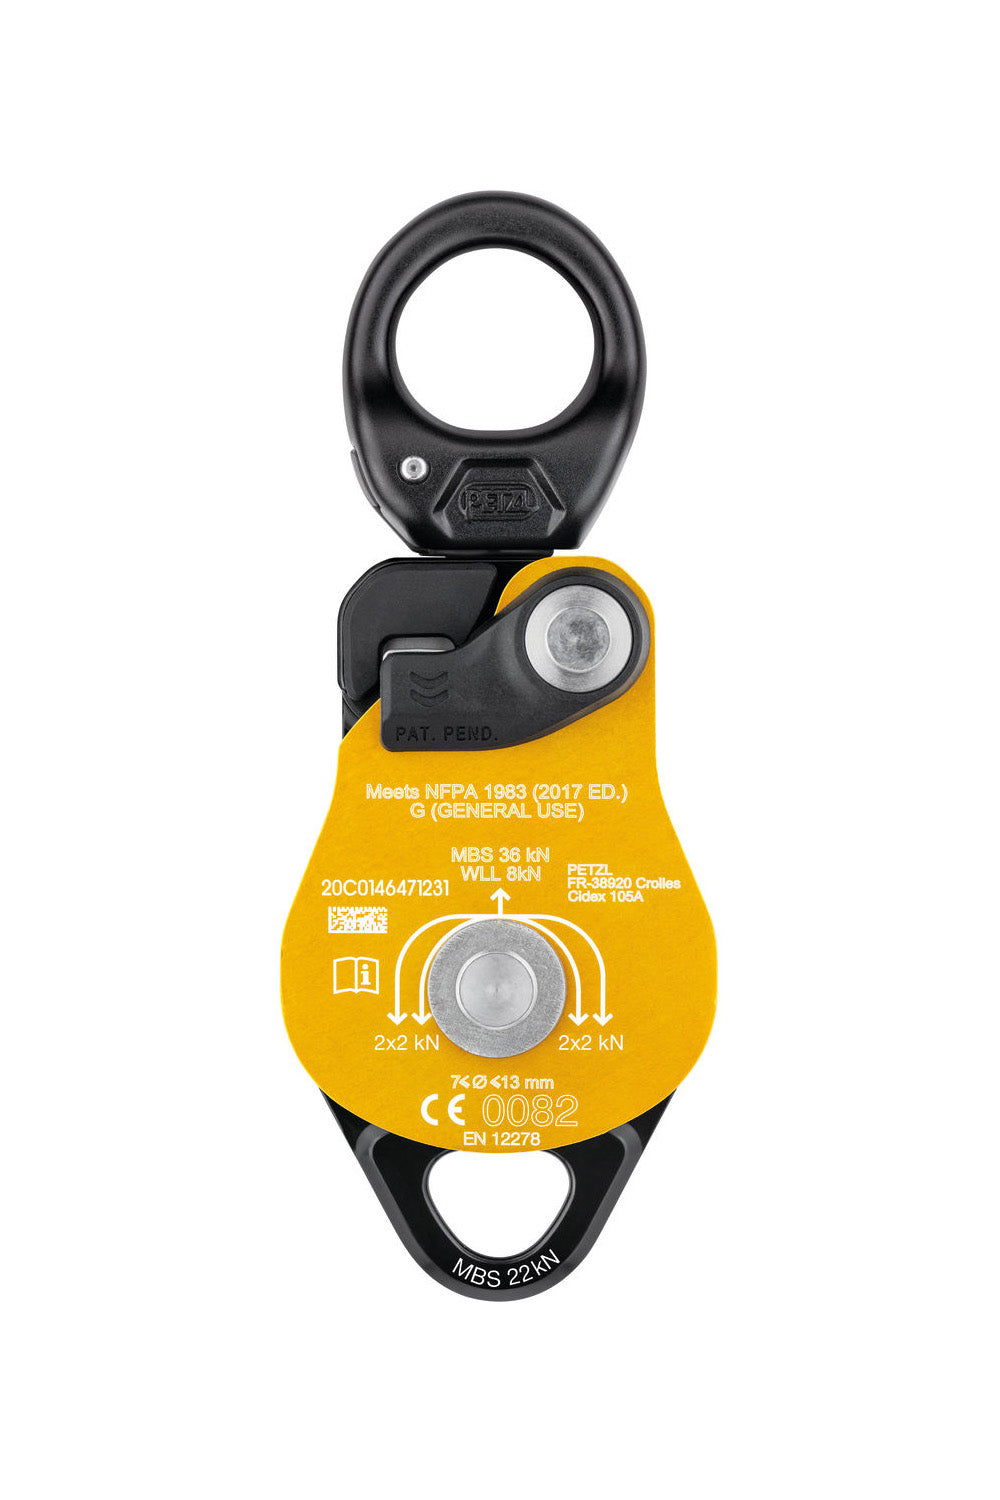 Petzl - Spin L2 Pulley